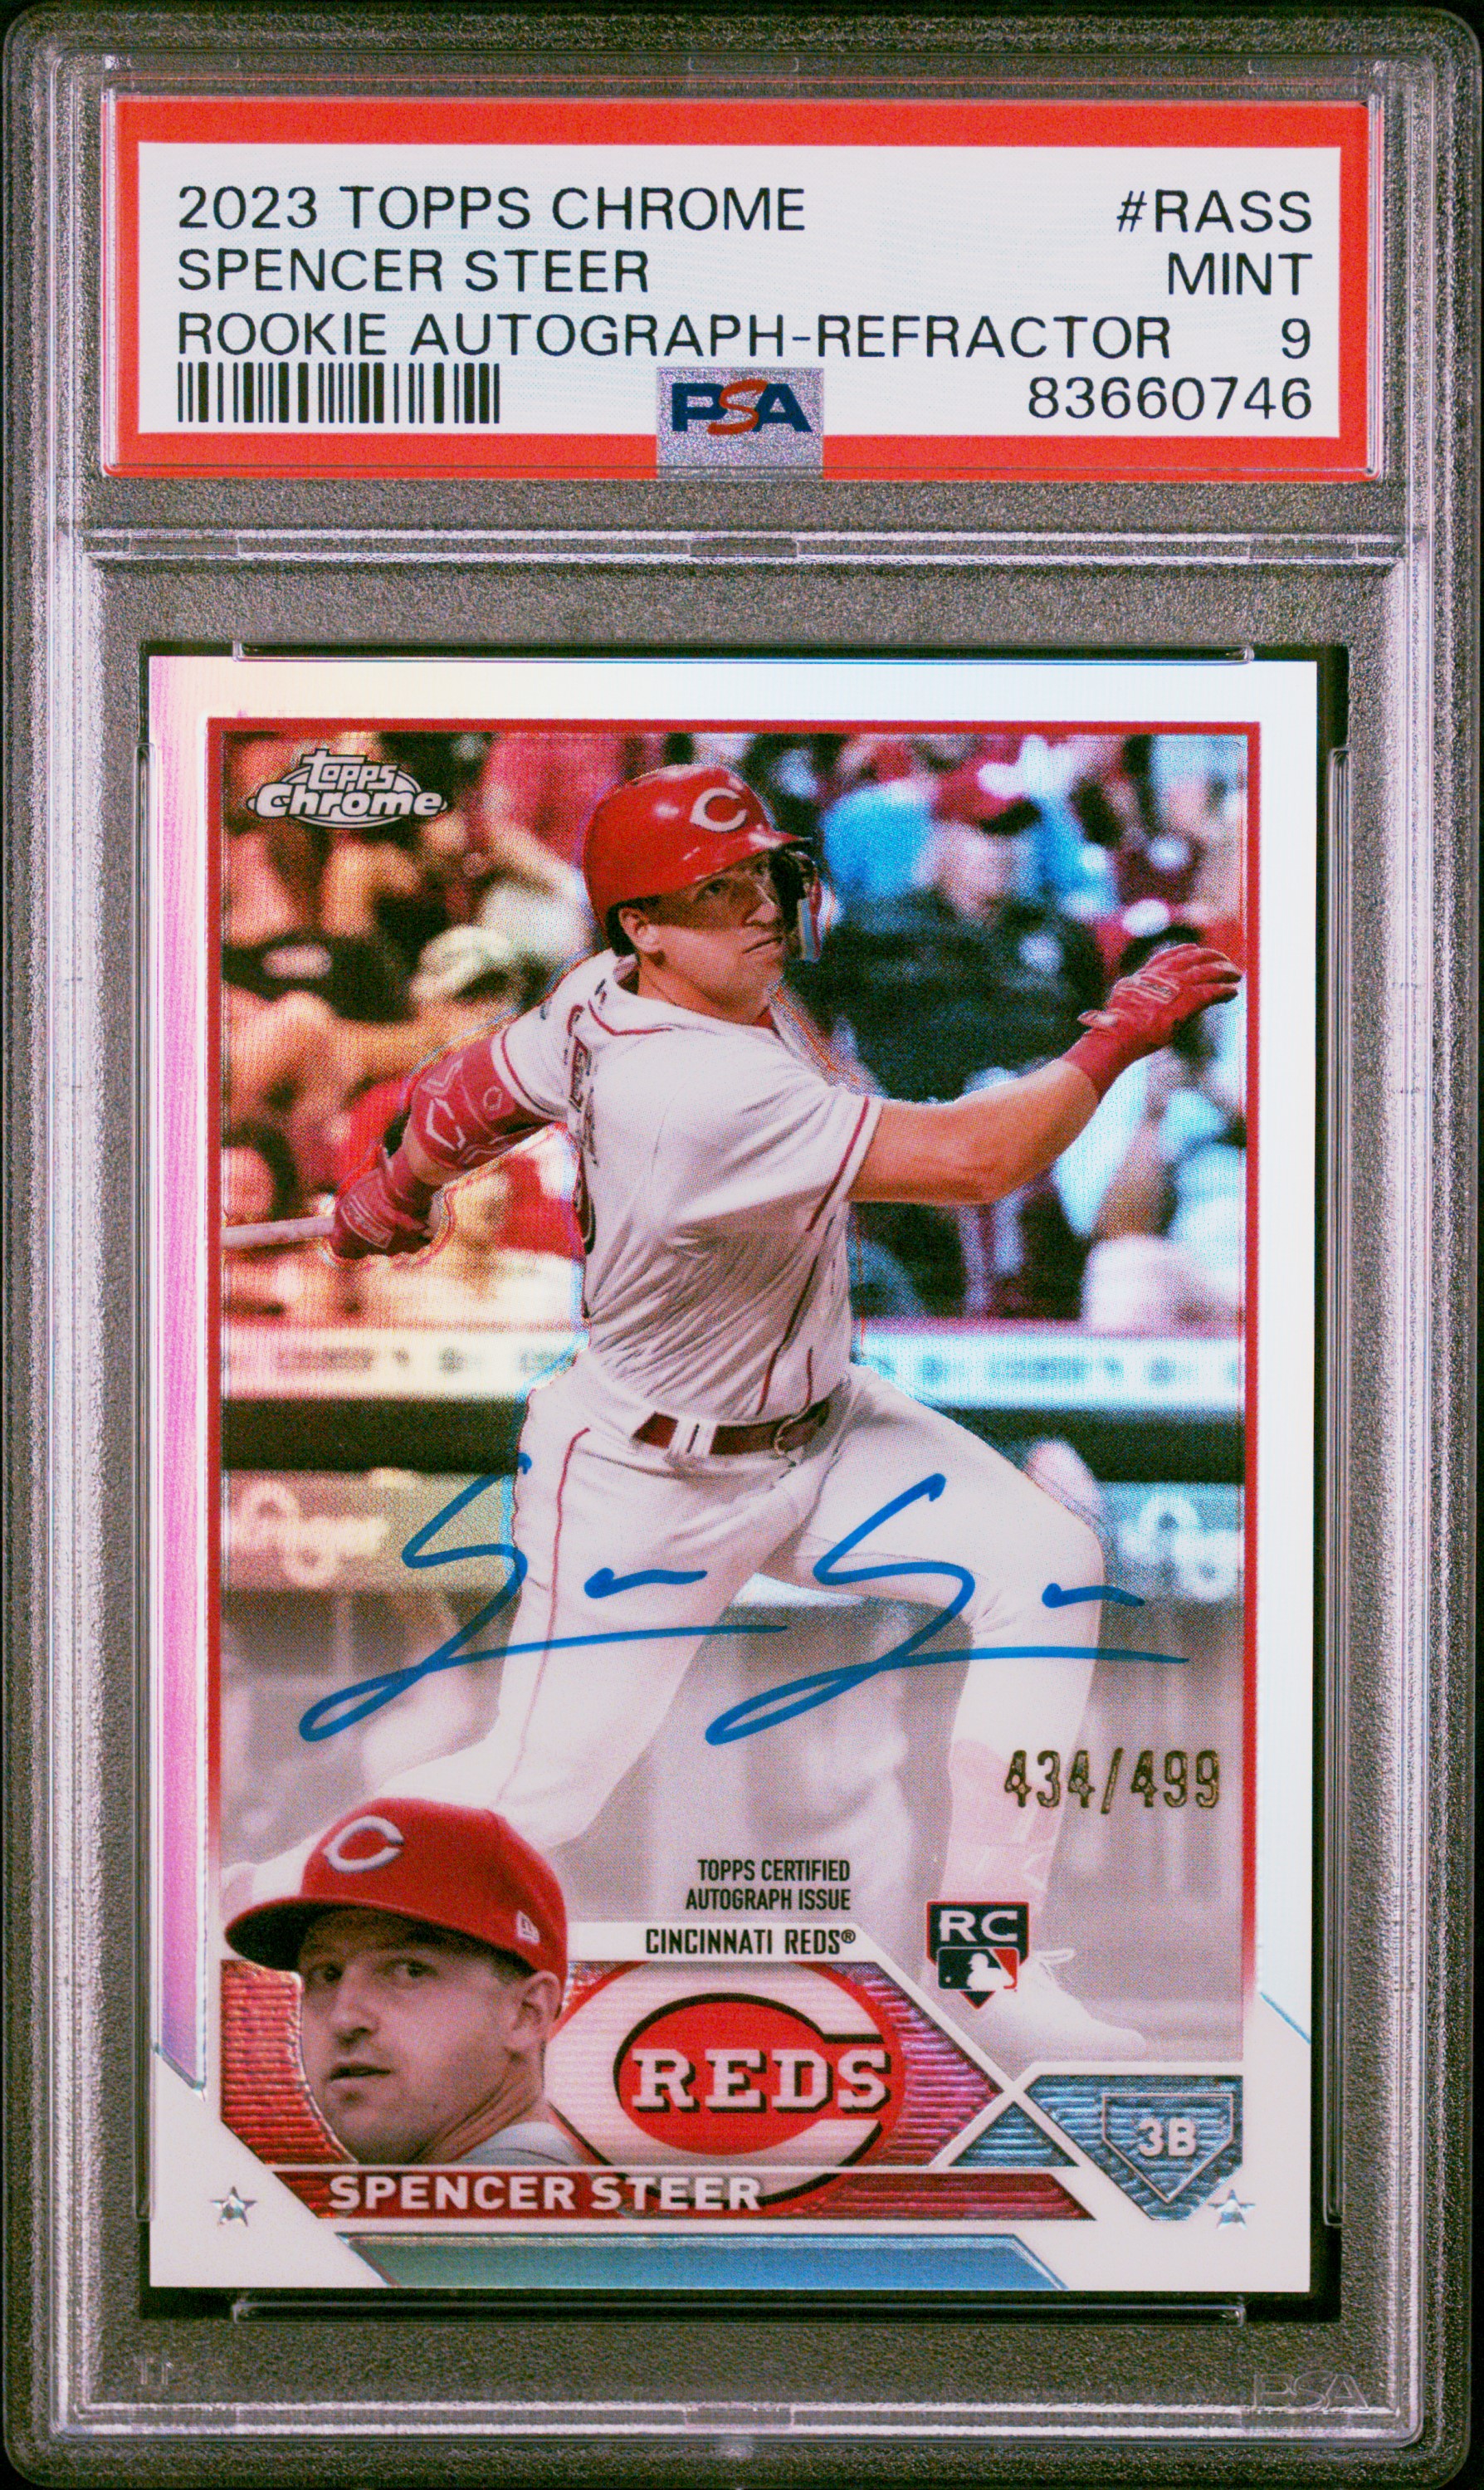 2023 Topps Chrome Rookie Autograph Refractor #RA-SS Spencer Steer Signed Rookie Card (#434/499) – PSA MINT 9